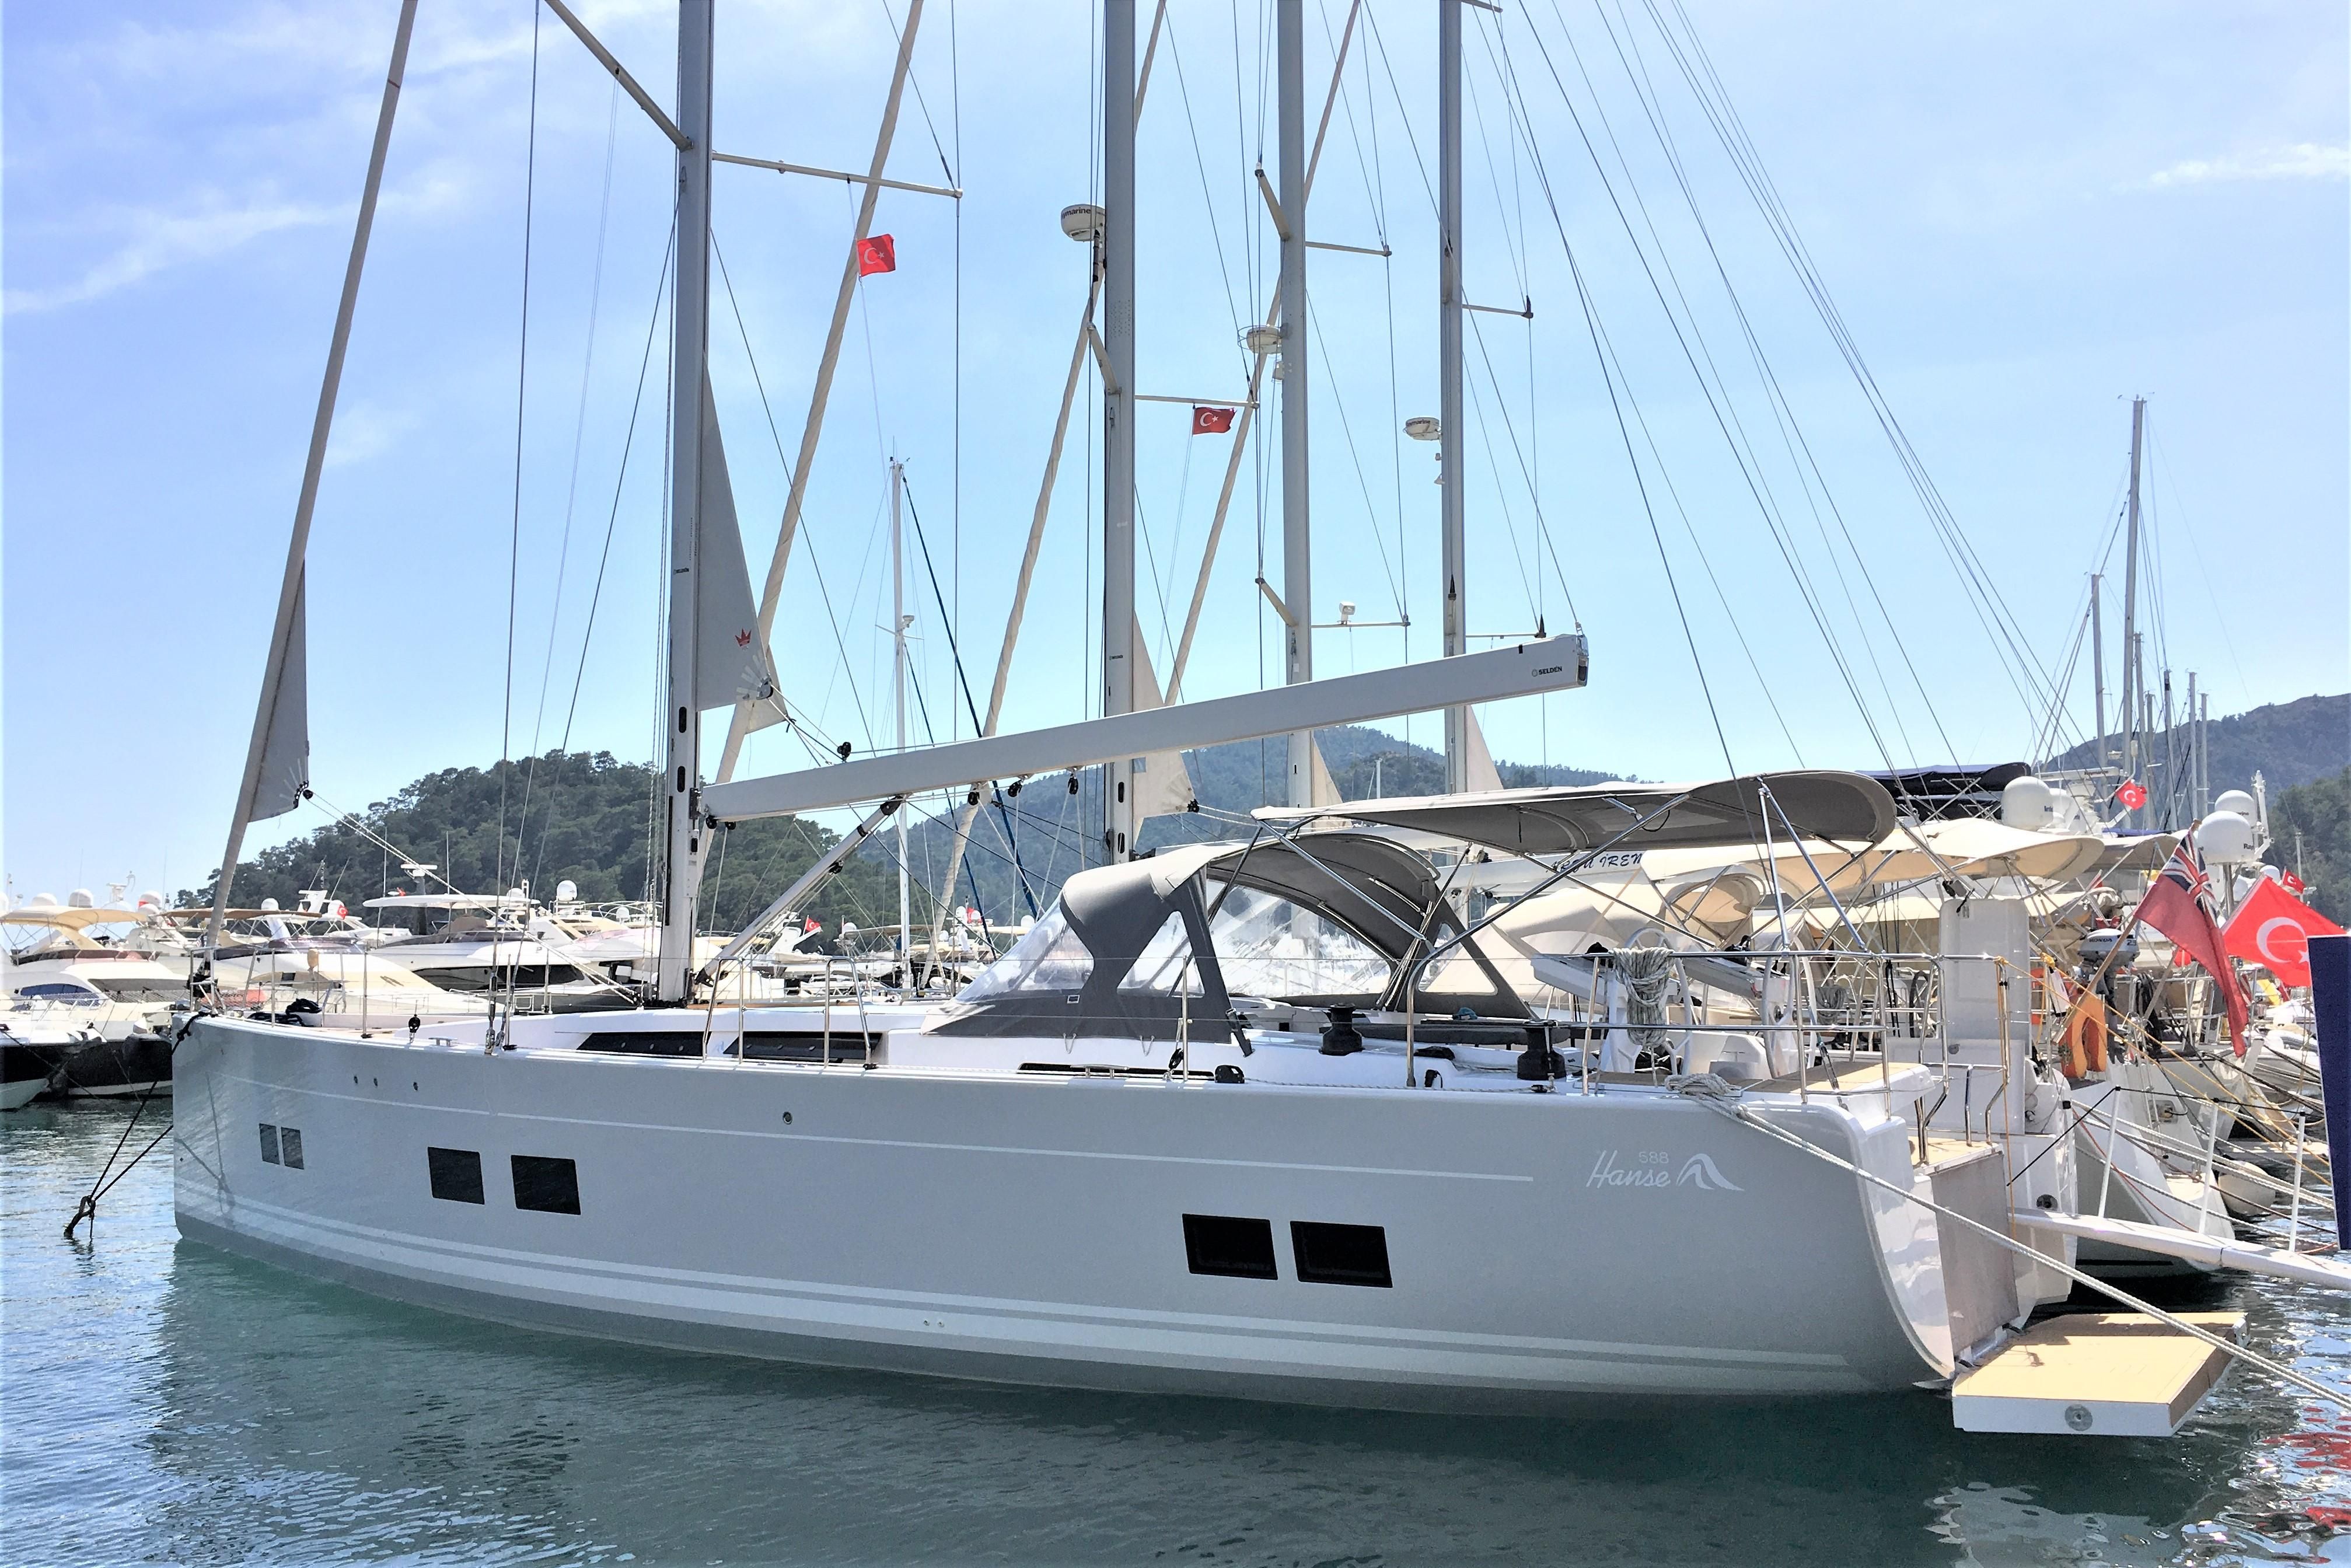 2017-hanse-588-sail-new-and-used-boats-for-sale-www-yachtworld-co-uk